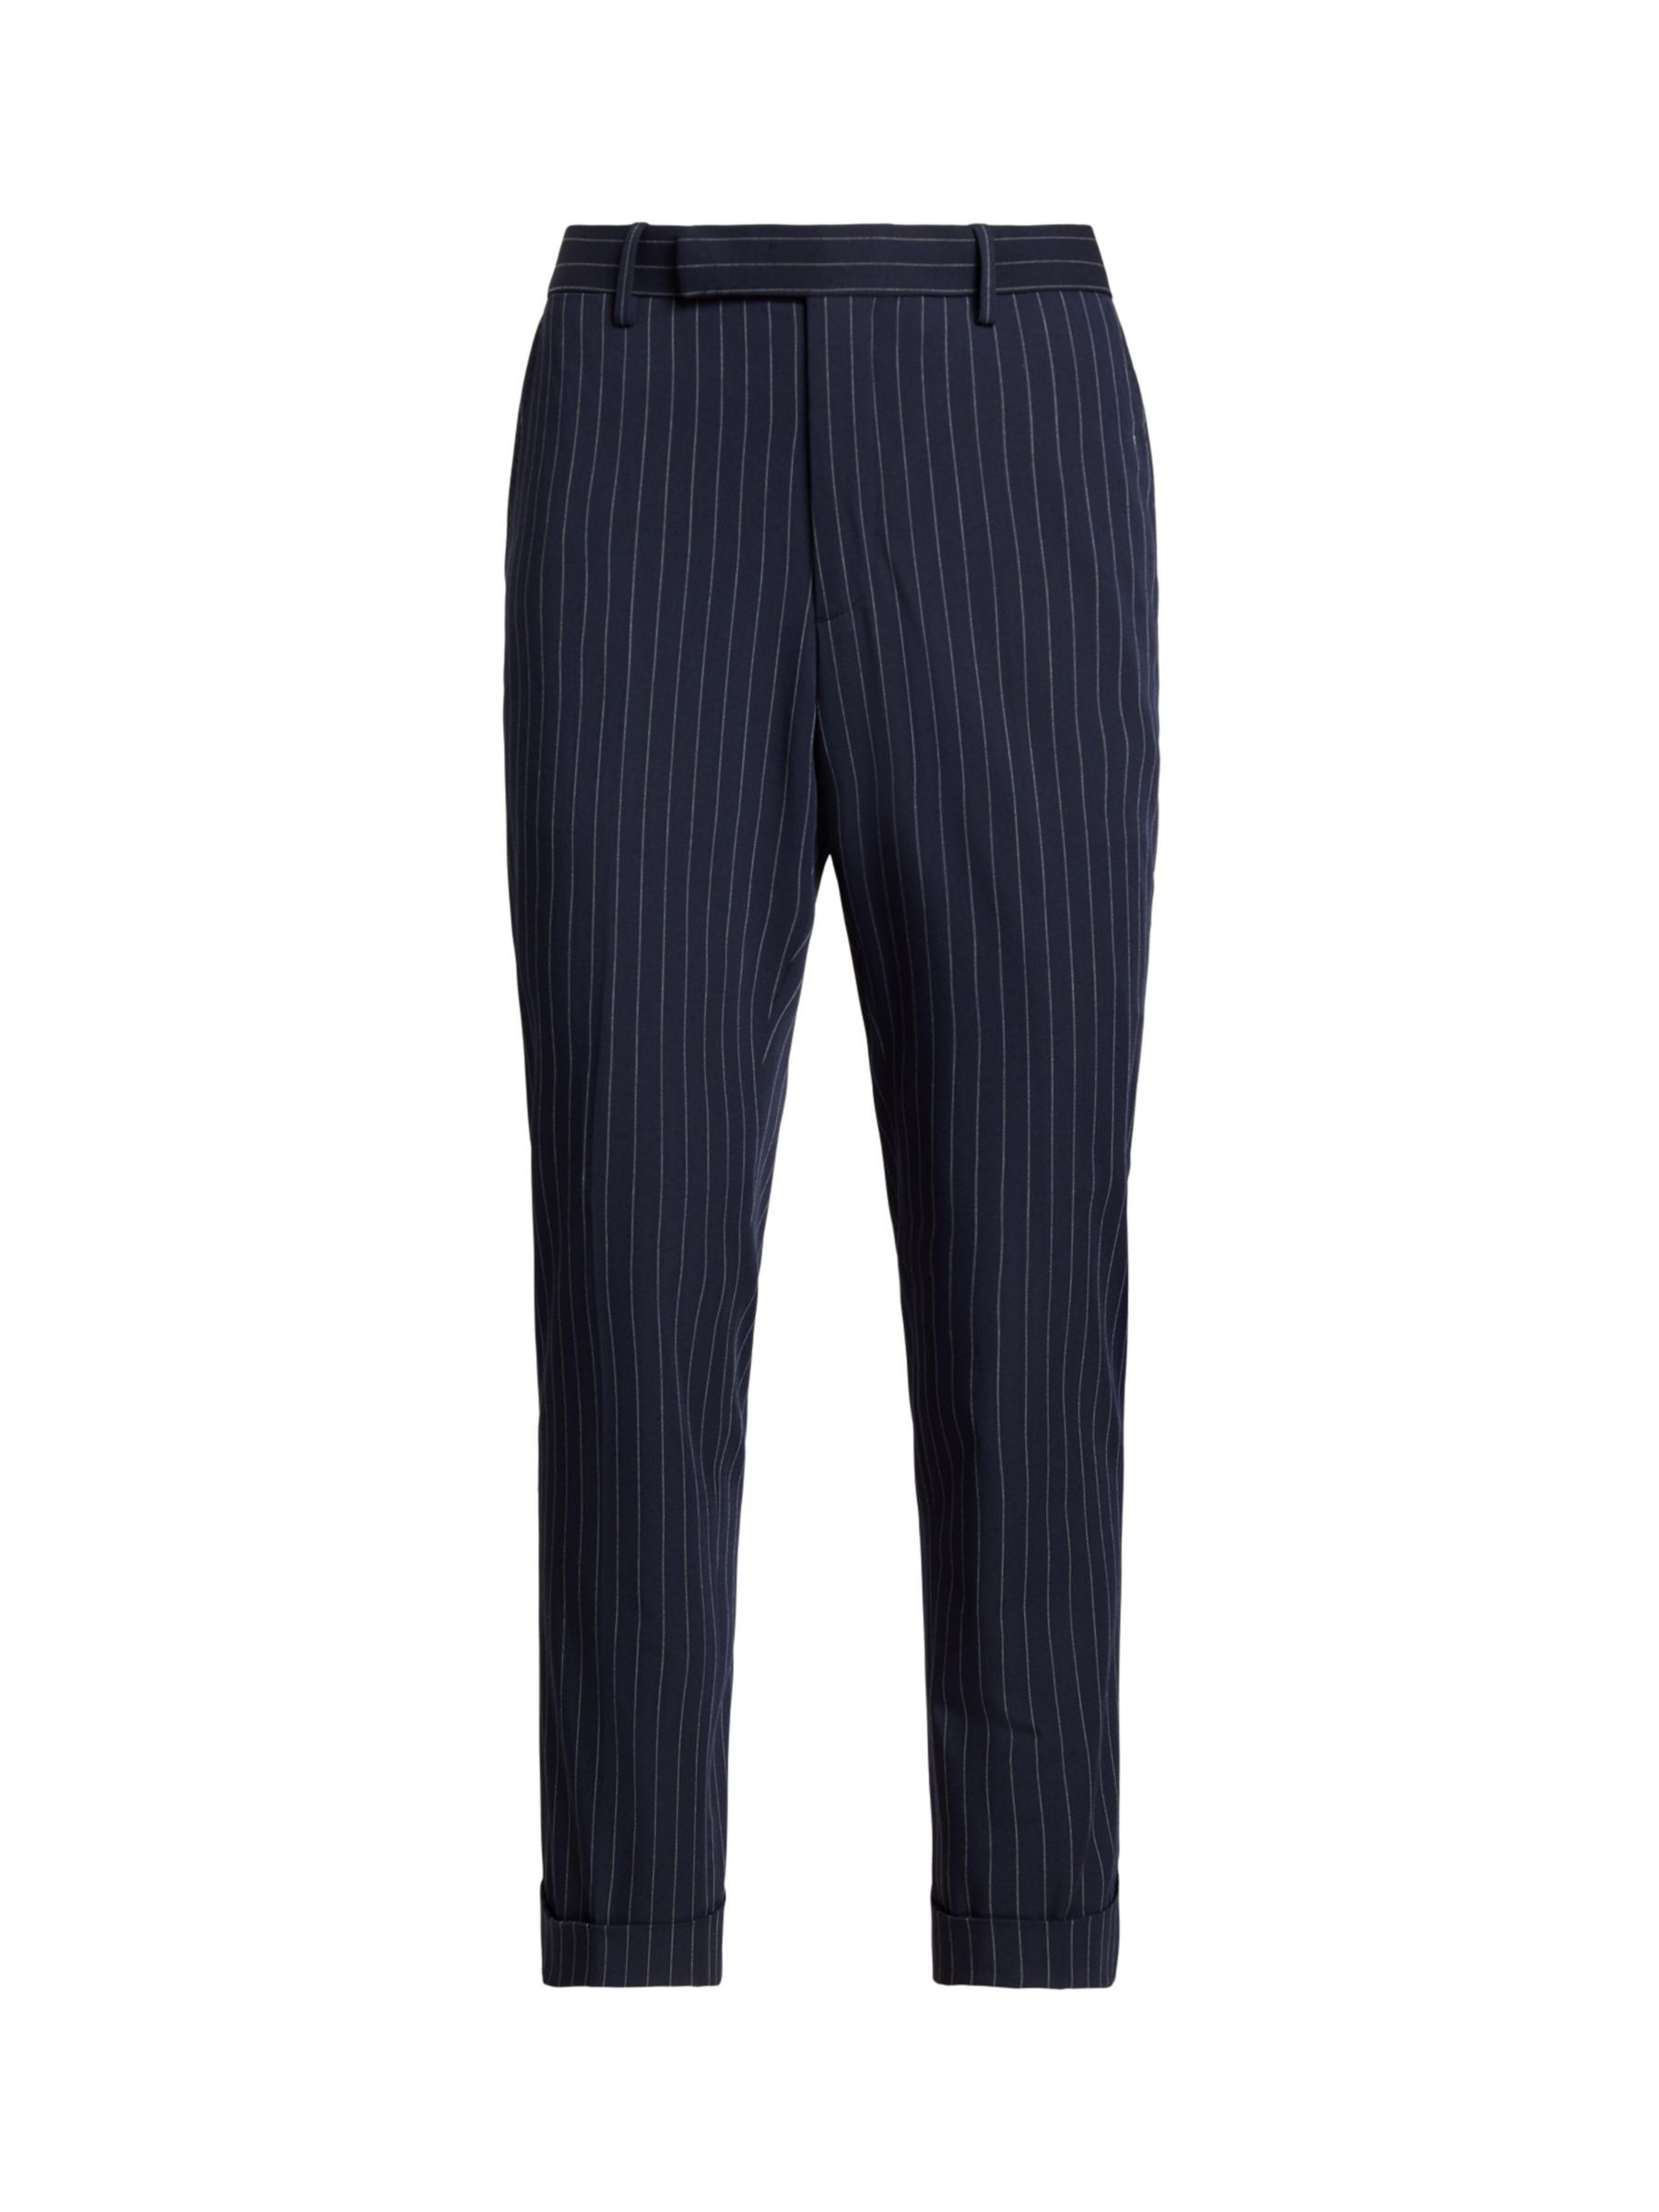 Ralph Lauren Polo Ralph Lauren Chester Tailored Fit Twill Suit Trousers, Navy/Grey, 36R